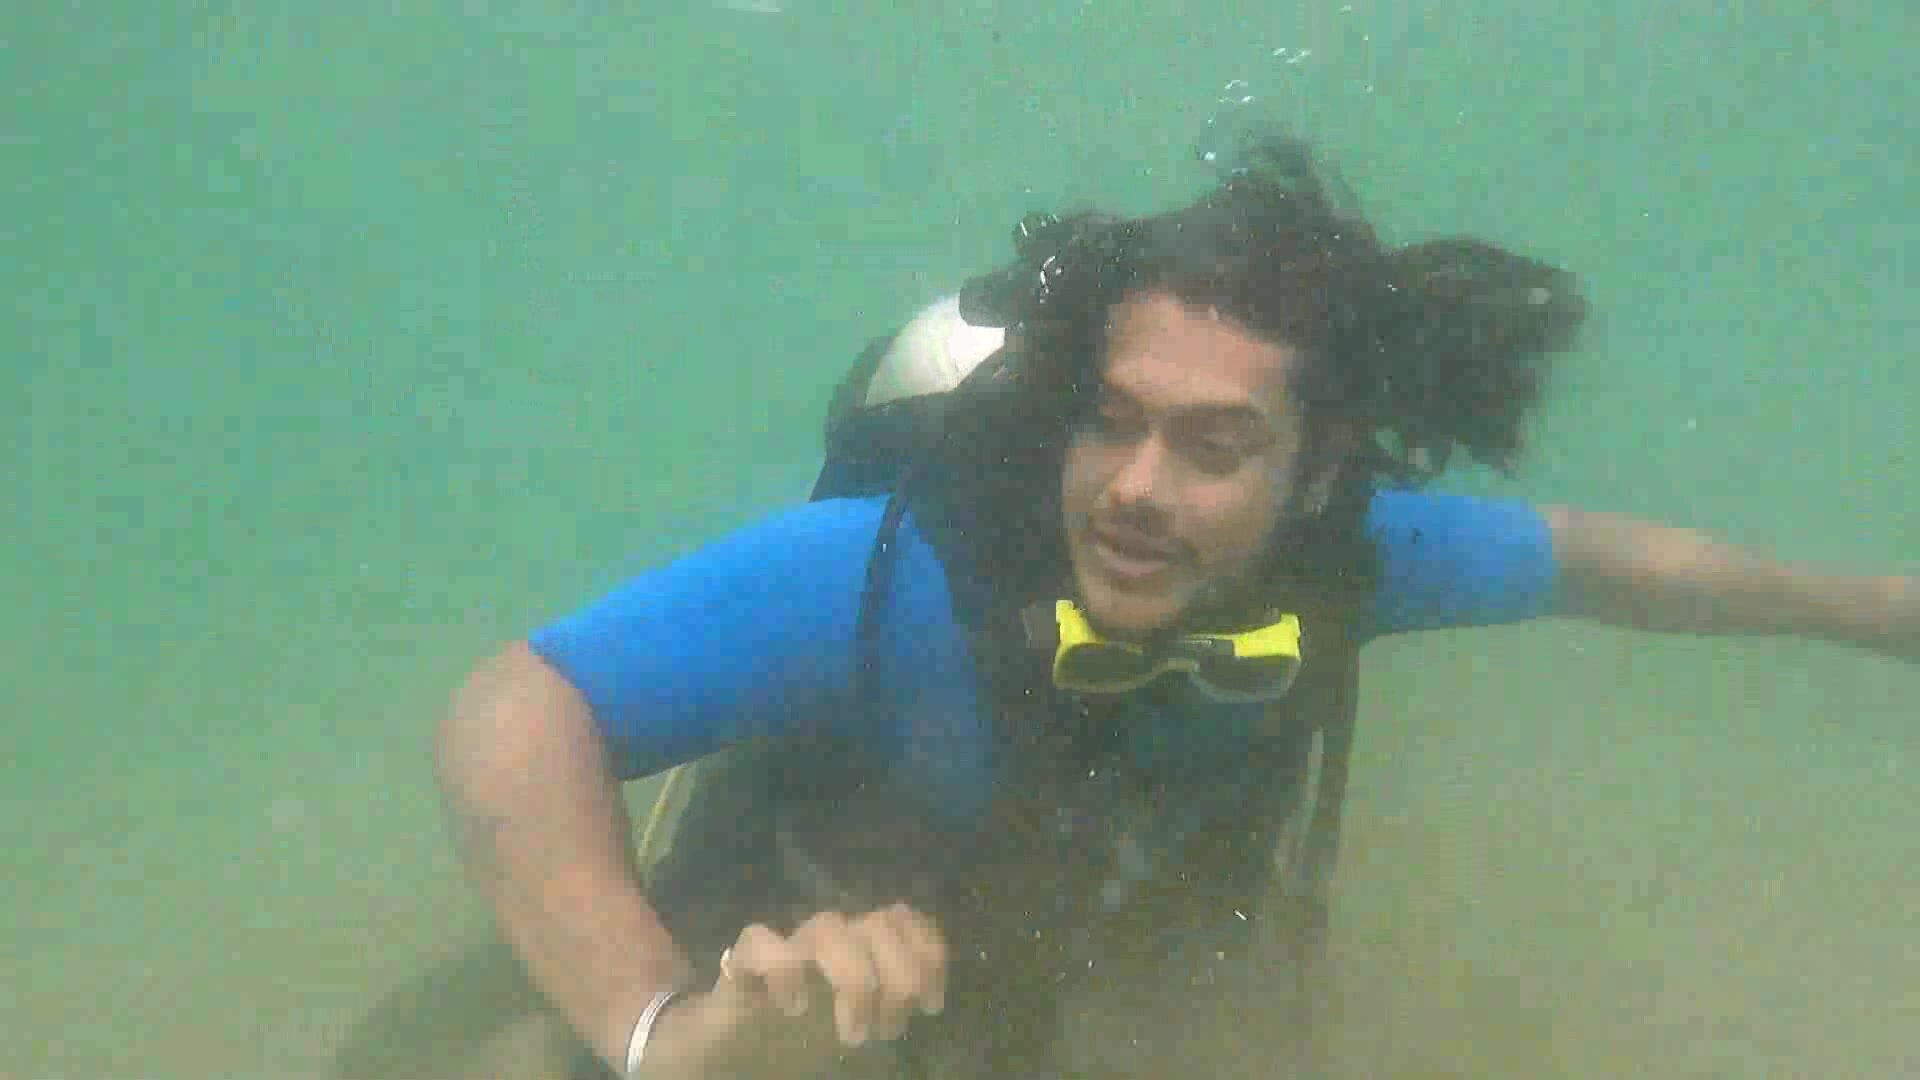 Long haired scubadiver barefaced underwater